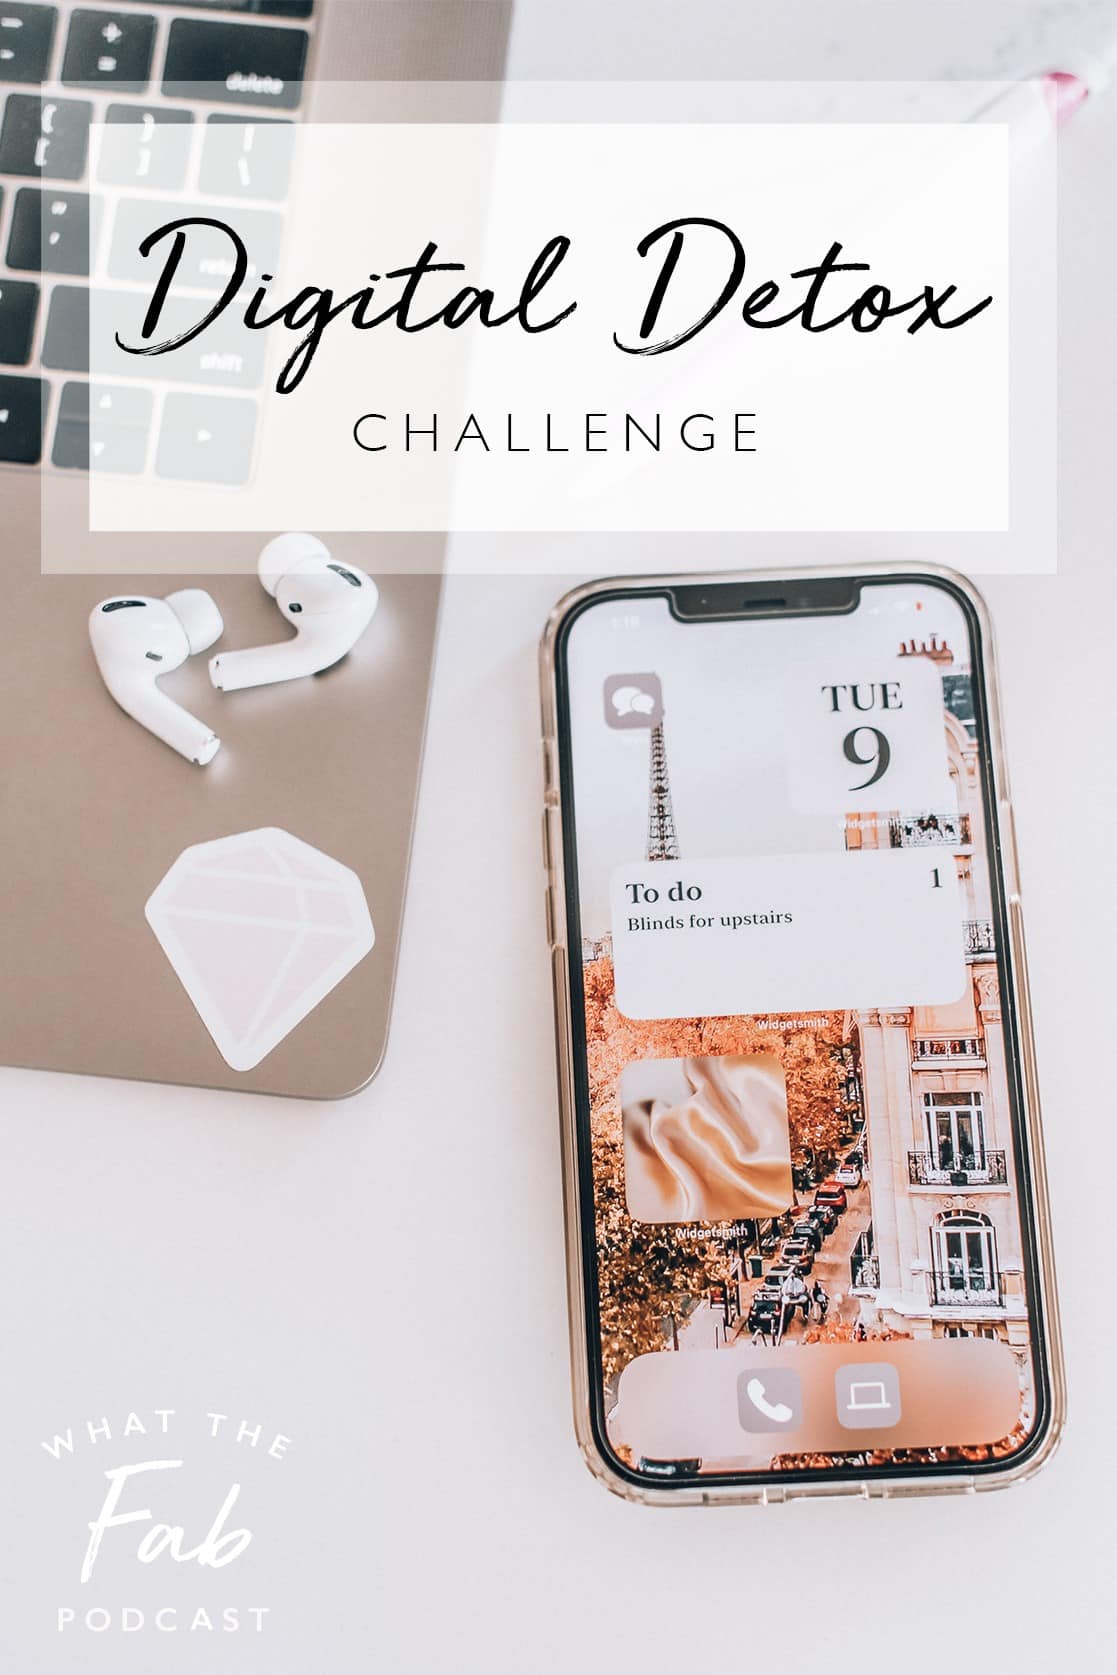 Digital detox challenge to declutter your digital life, by lifestyle blogger What The Fab